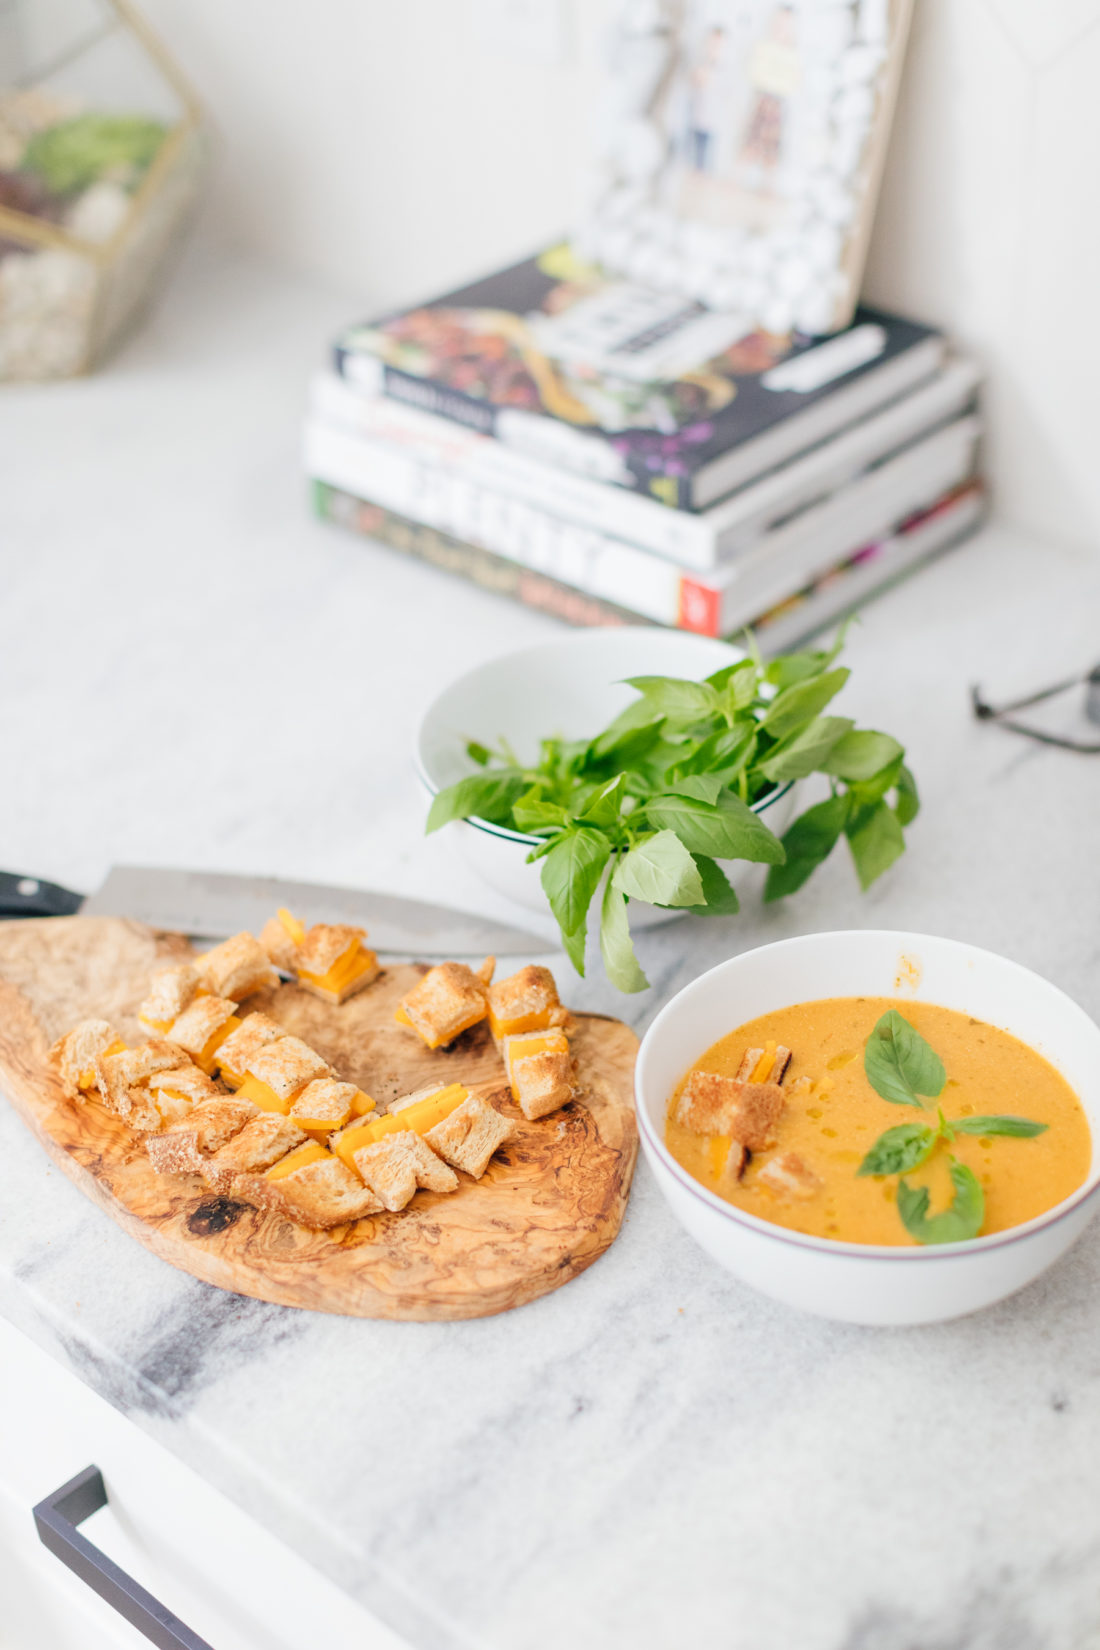 Eva Amurri Martino shares her Heirloom Tomato Soup With Grilled Cheese Croutons recipe